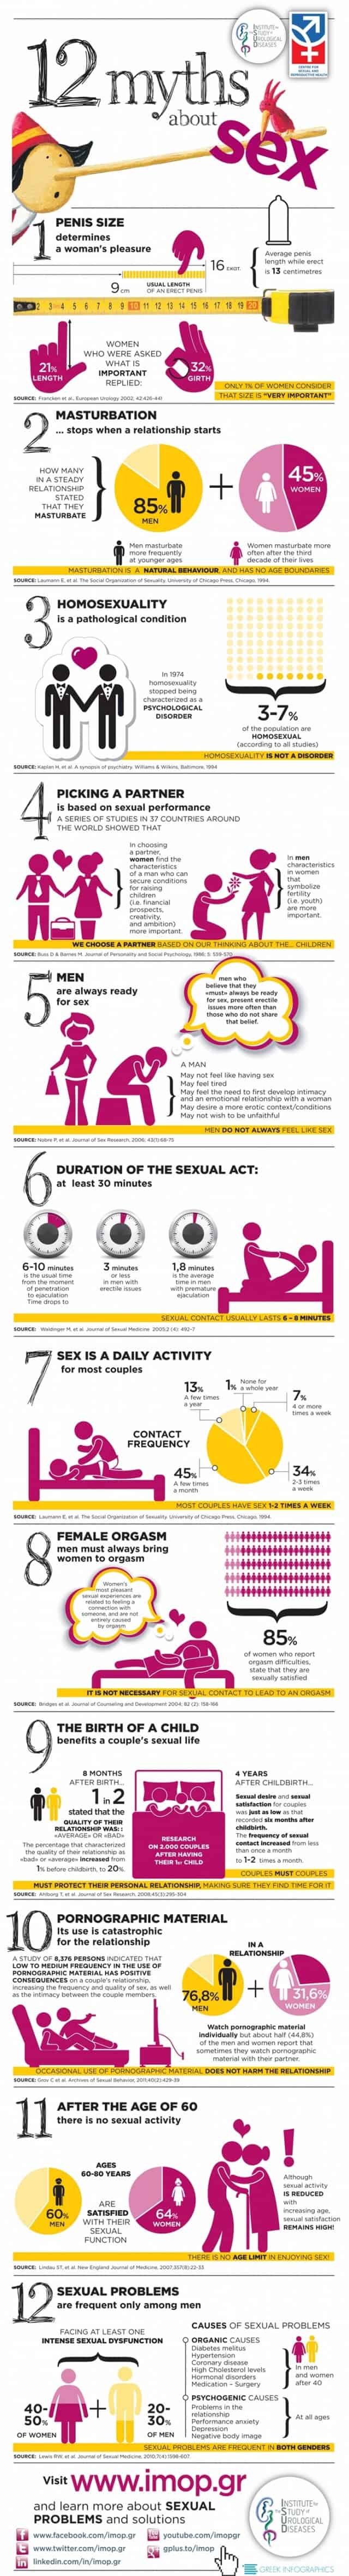 12 Myths About Sex Infographic